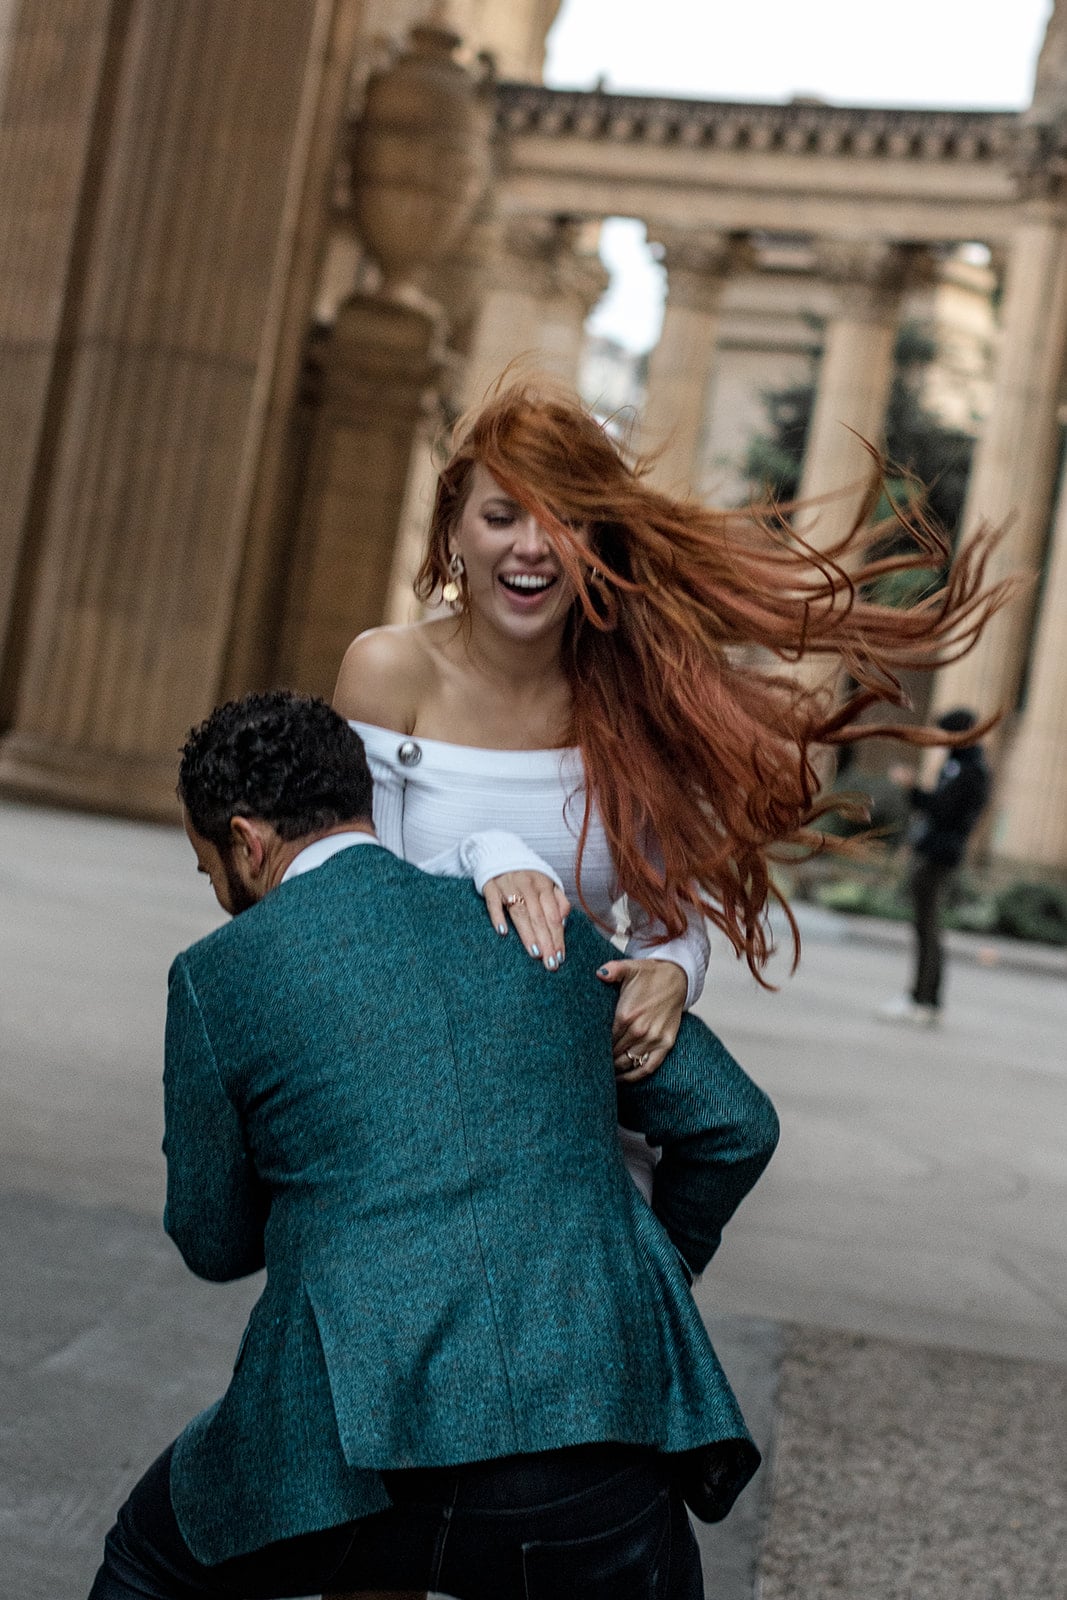 Man carries woman while laughing